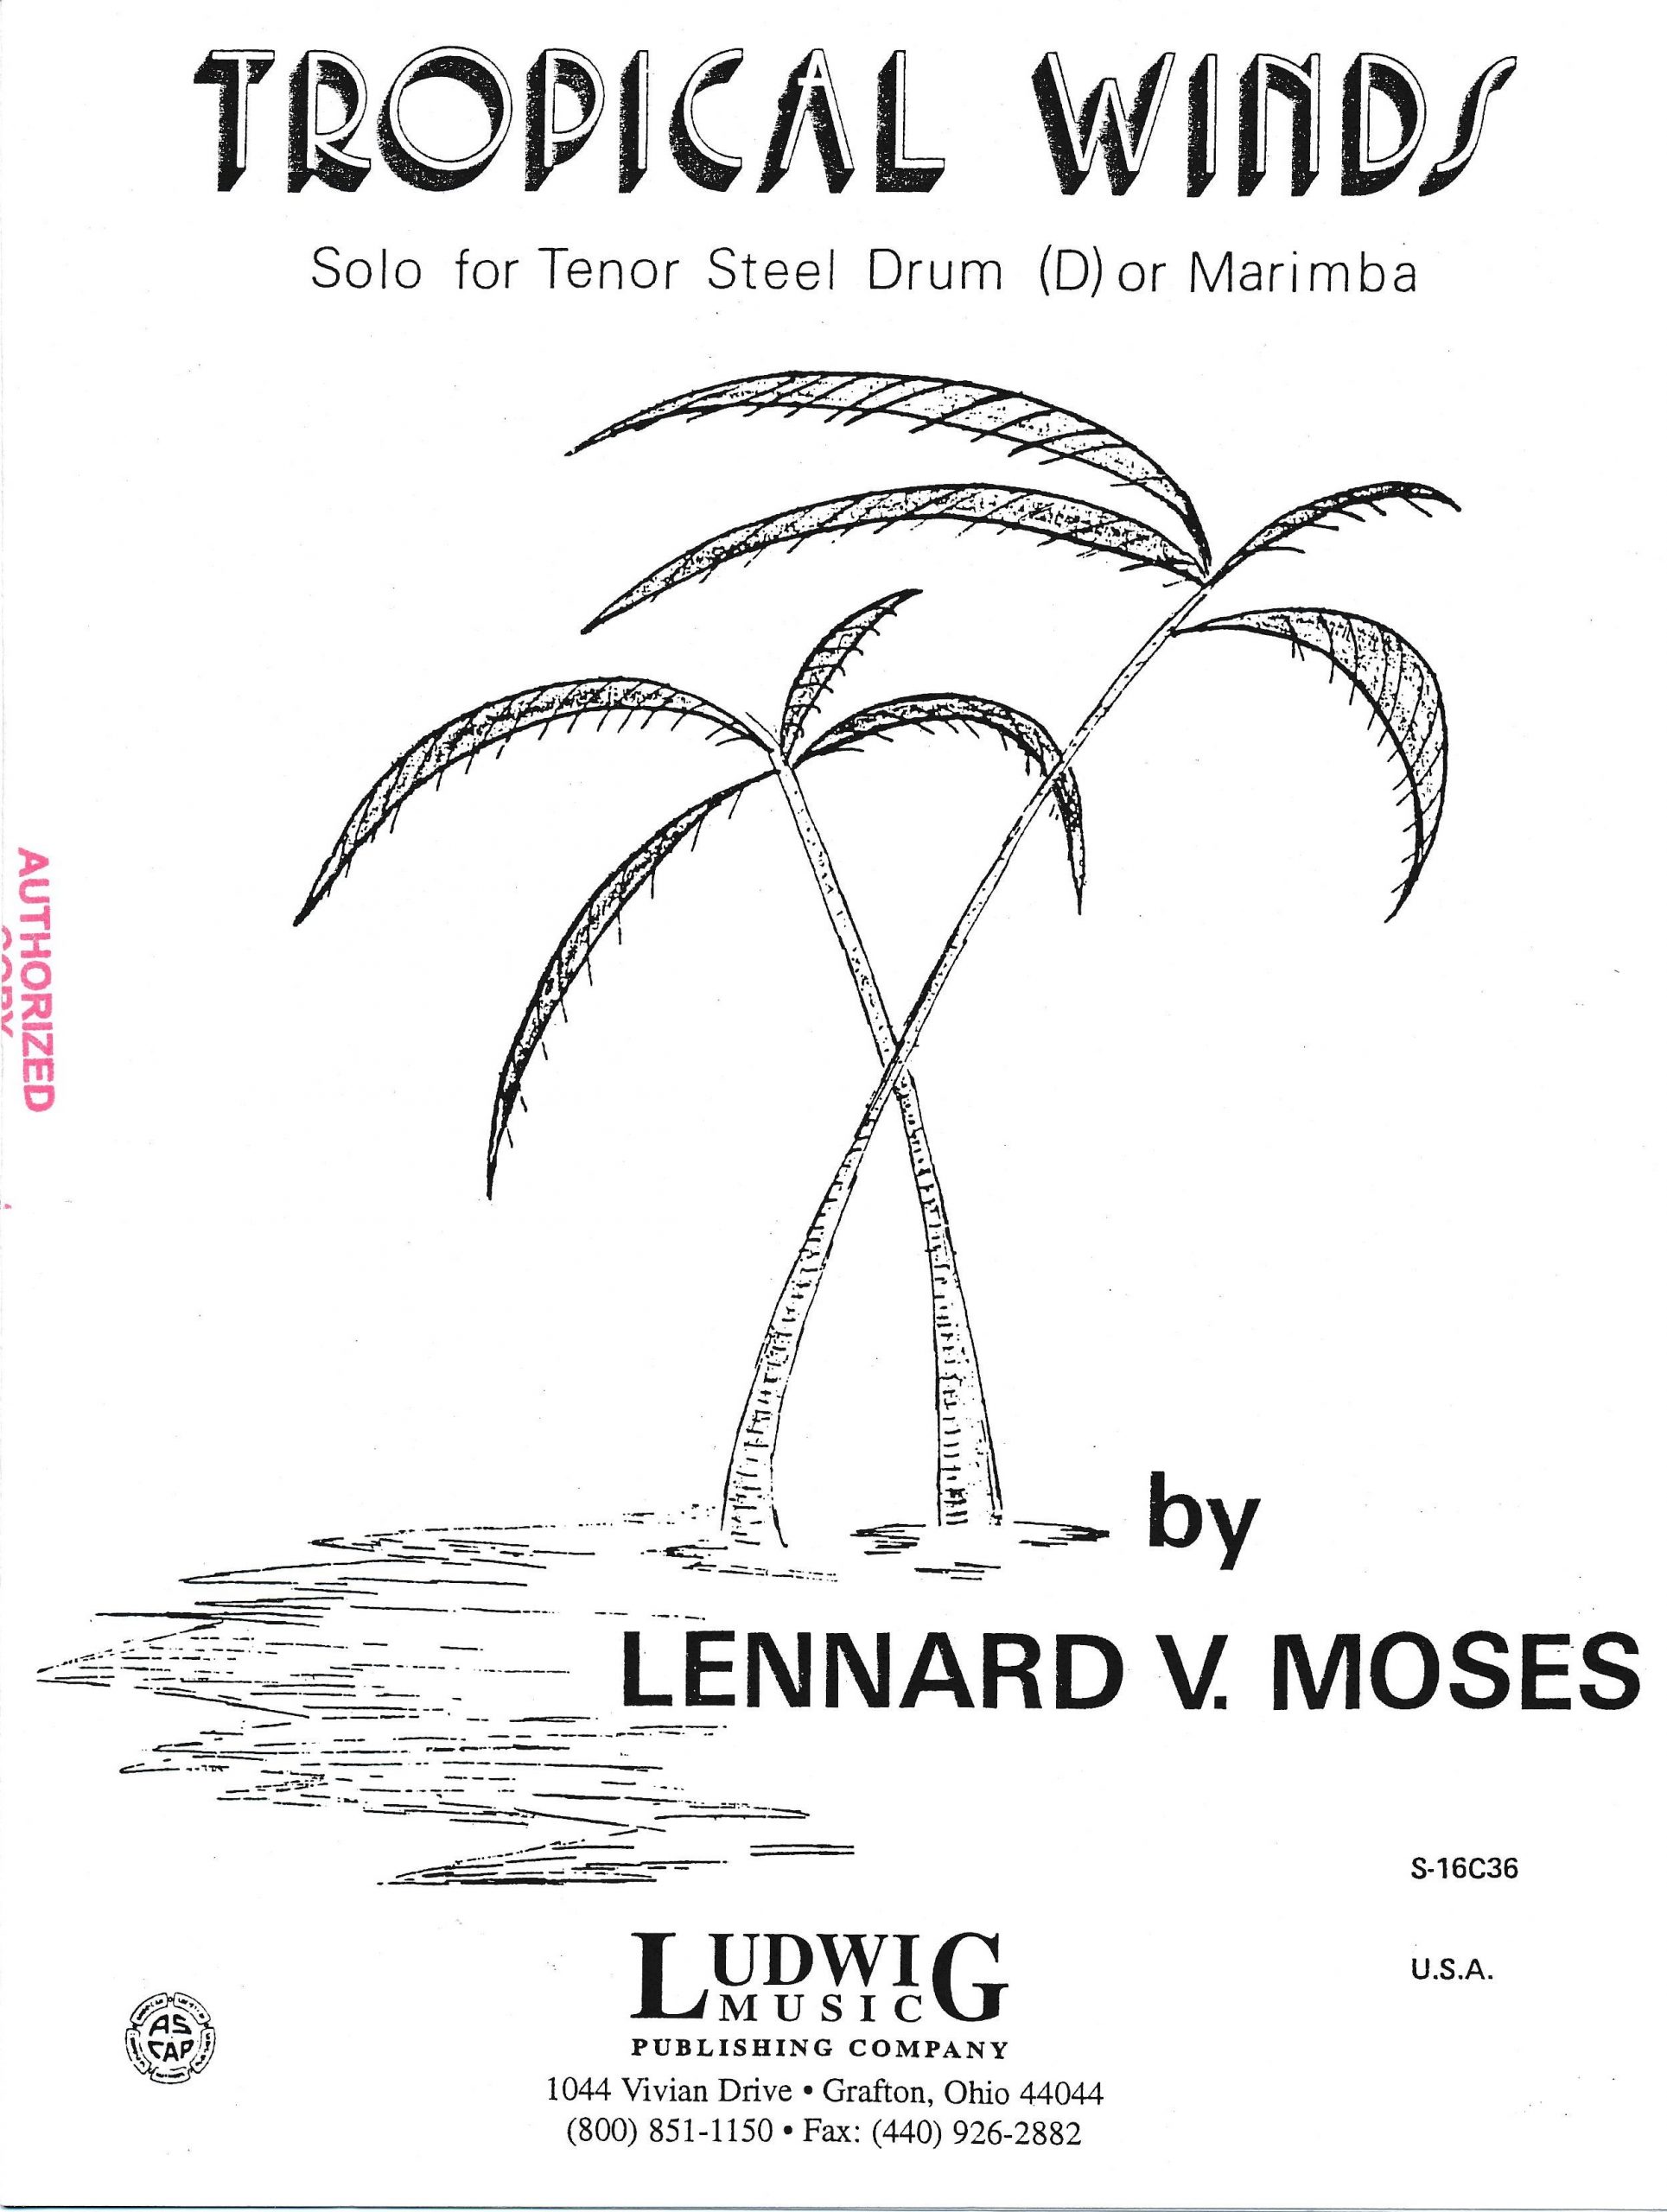 Tropcial Winds by Lennard V. Moses